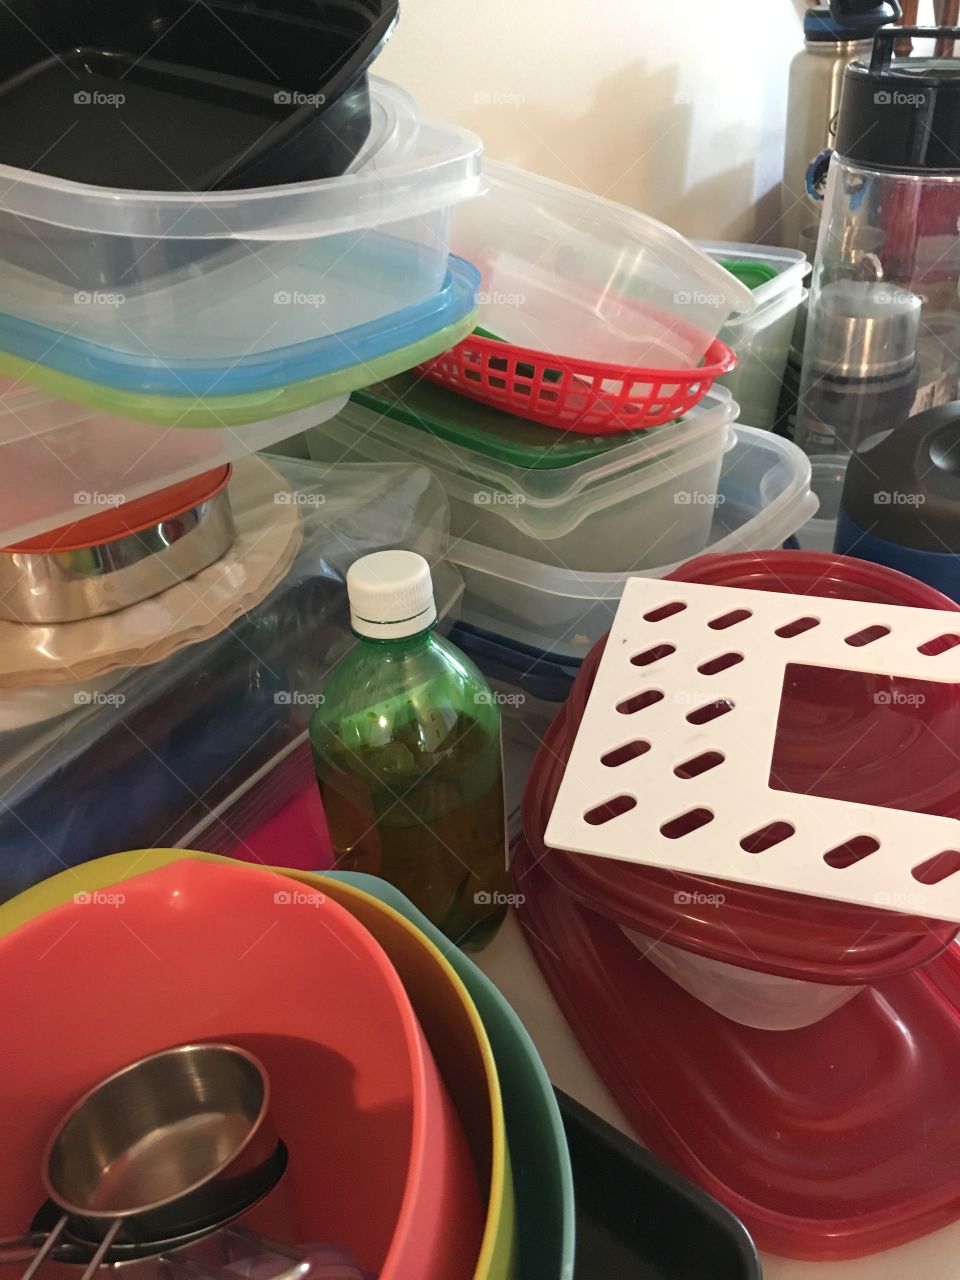 Organizing and sorting the lunch containers!